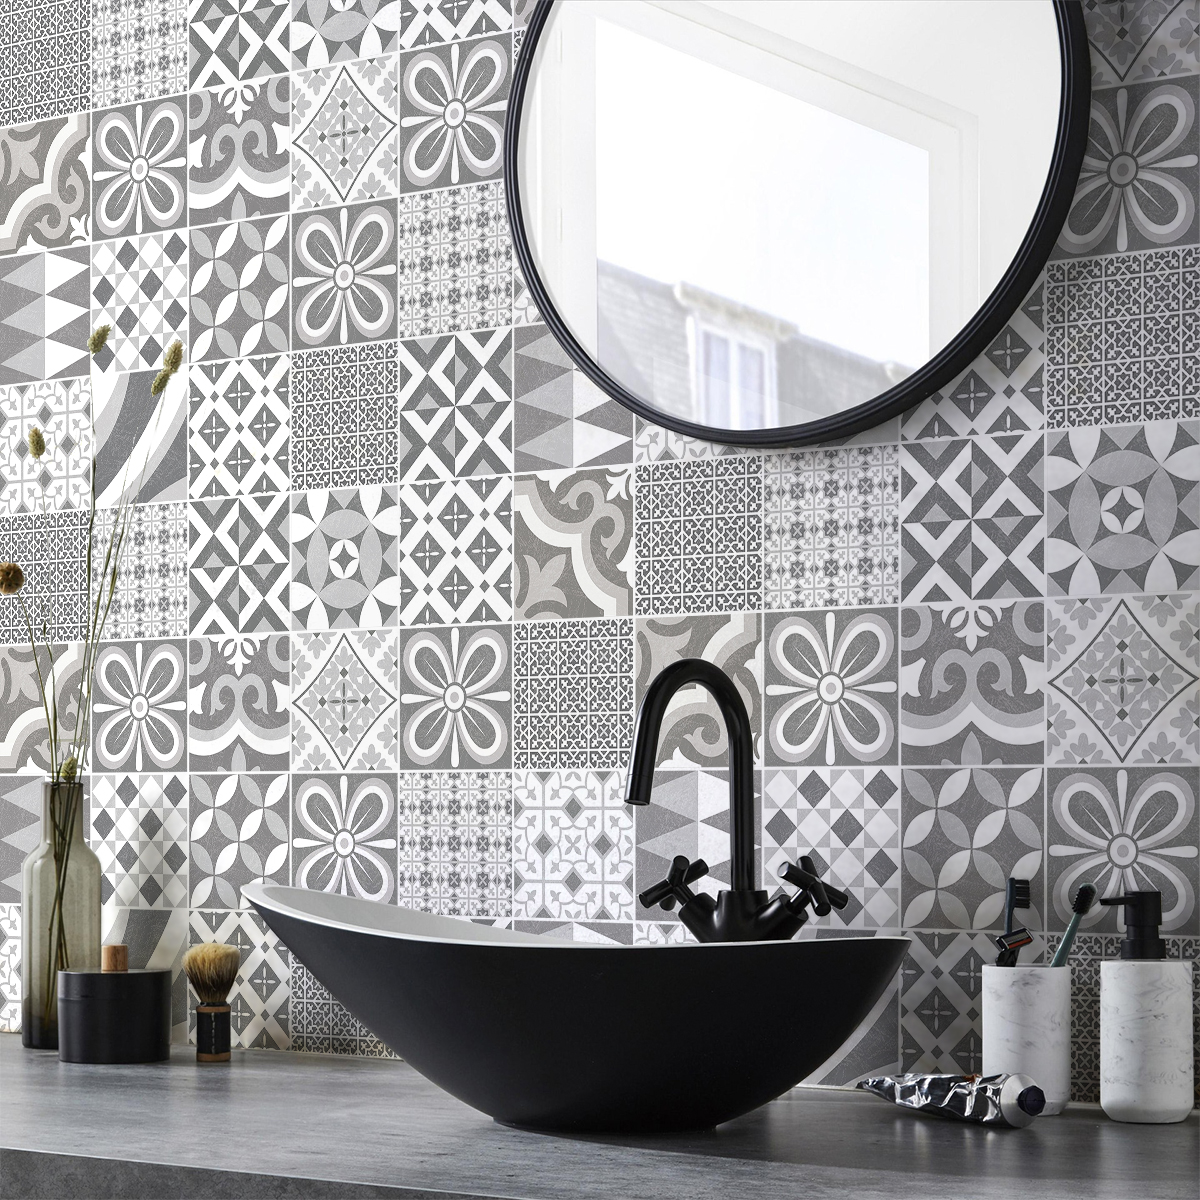 24 wall stickers cement tiles fioria